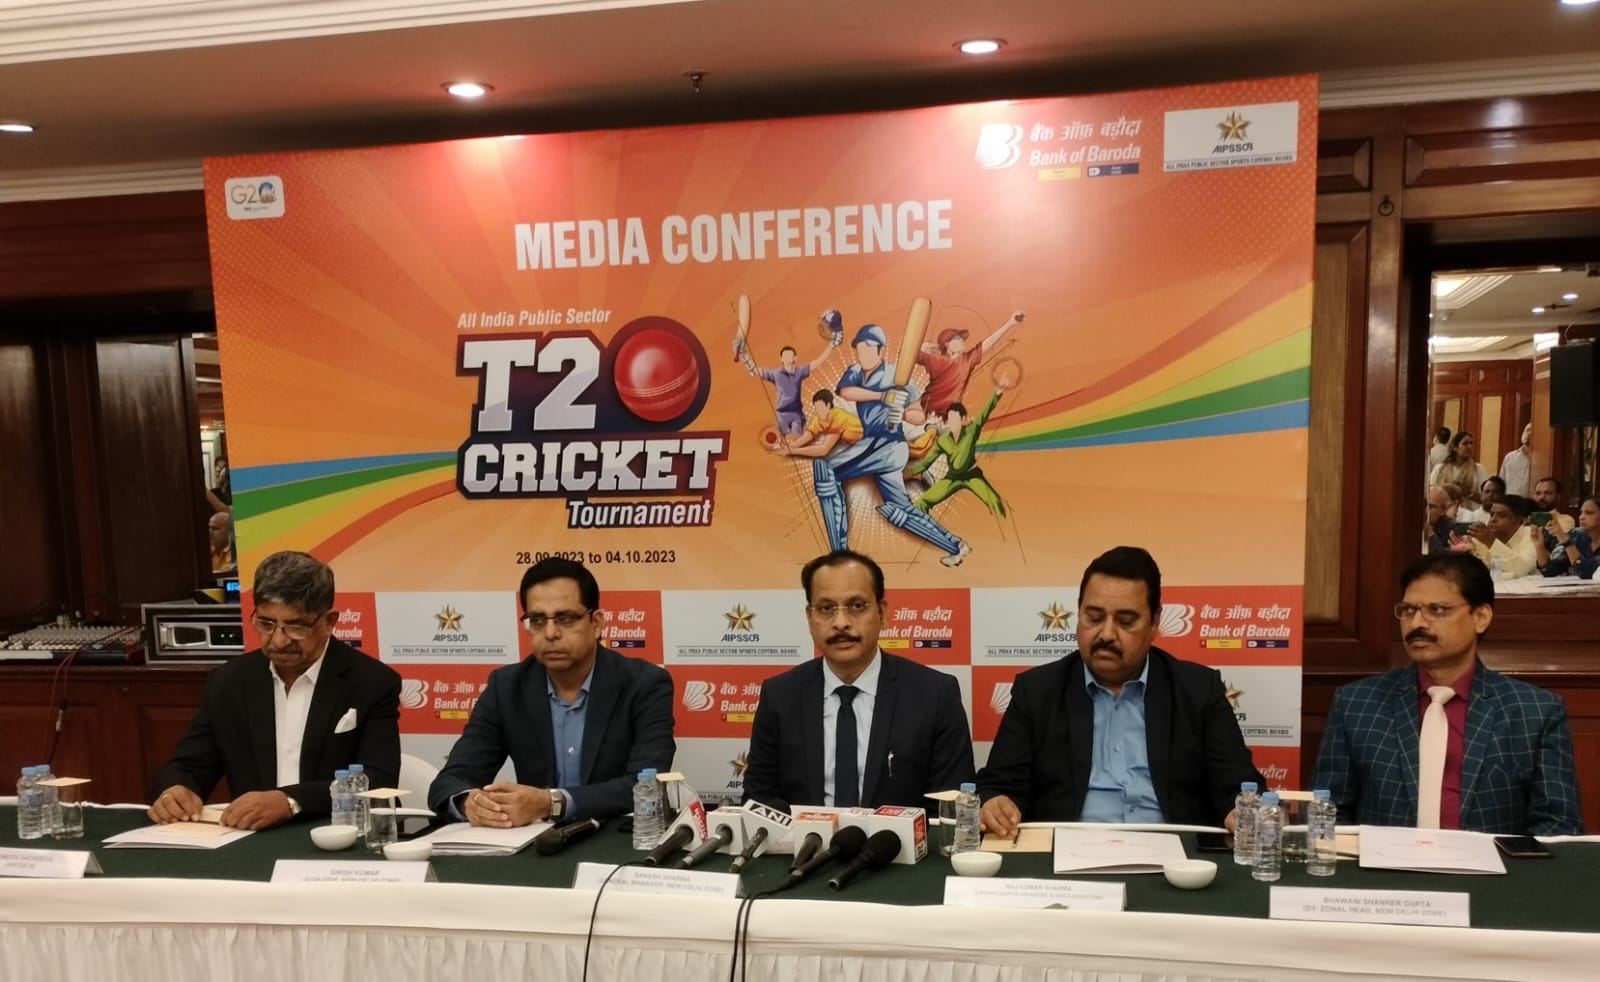 All India Public Sector T20 tourney to begin from Thursday